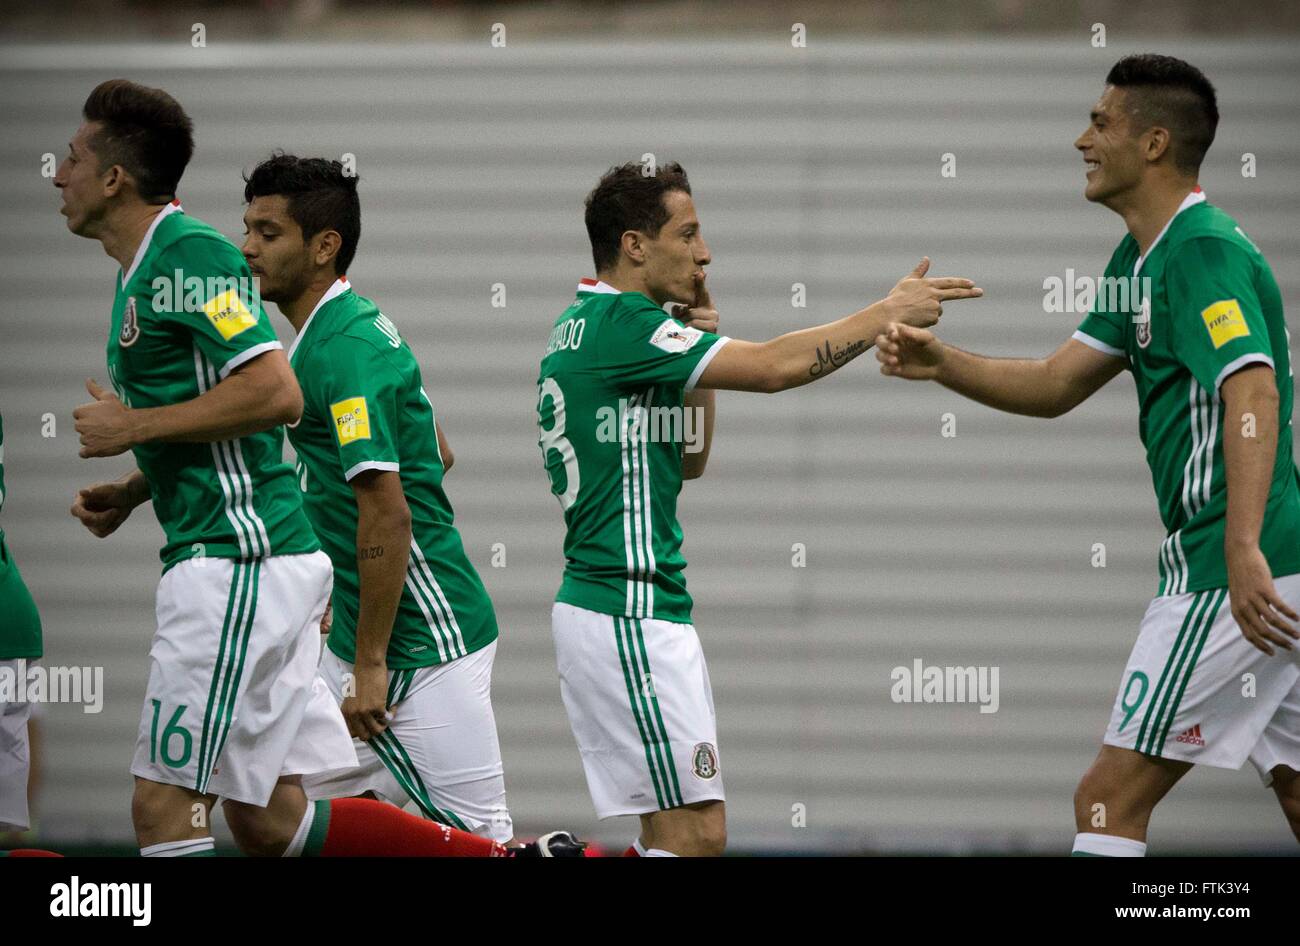 Ciudad De Mexico, Mexico. 29th Mar, 2016. Mexico's Andres Guardado (2nd R) celebrates after scoring with his teammate Raul Jimenez (R) during the qualifying match for 2018 Russia World Cup against Canada at Azteca Stadium in Mexico City, capital of Mexico, on March 29, 2016. Mexico won 2-0. © Alejandro Ayala/Xinhua/Alamy Live News Stock Photo